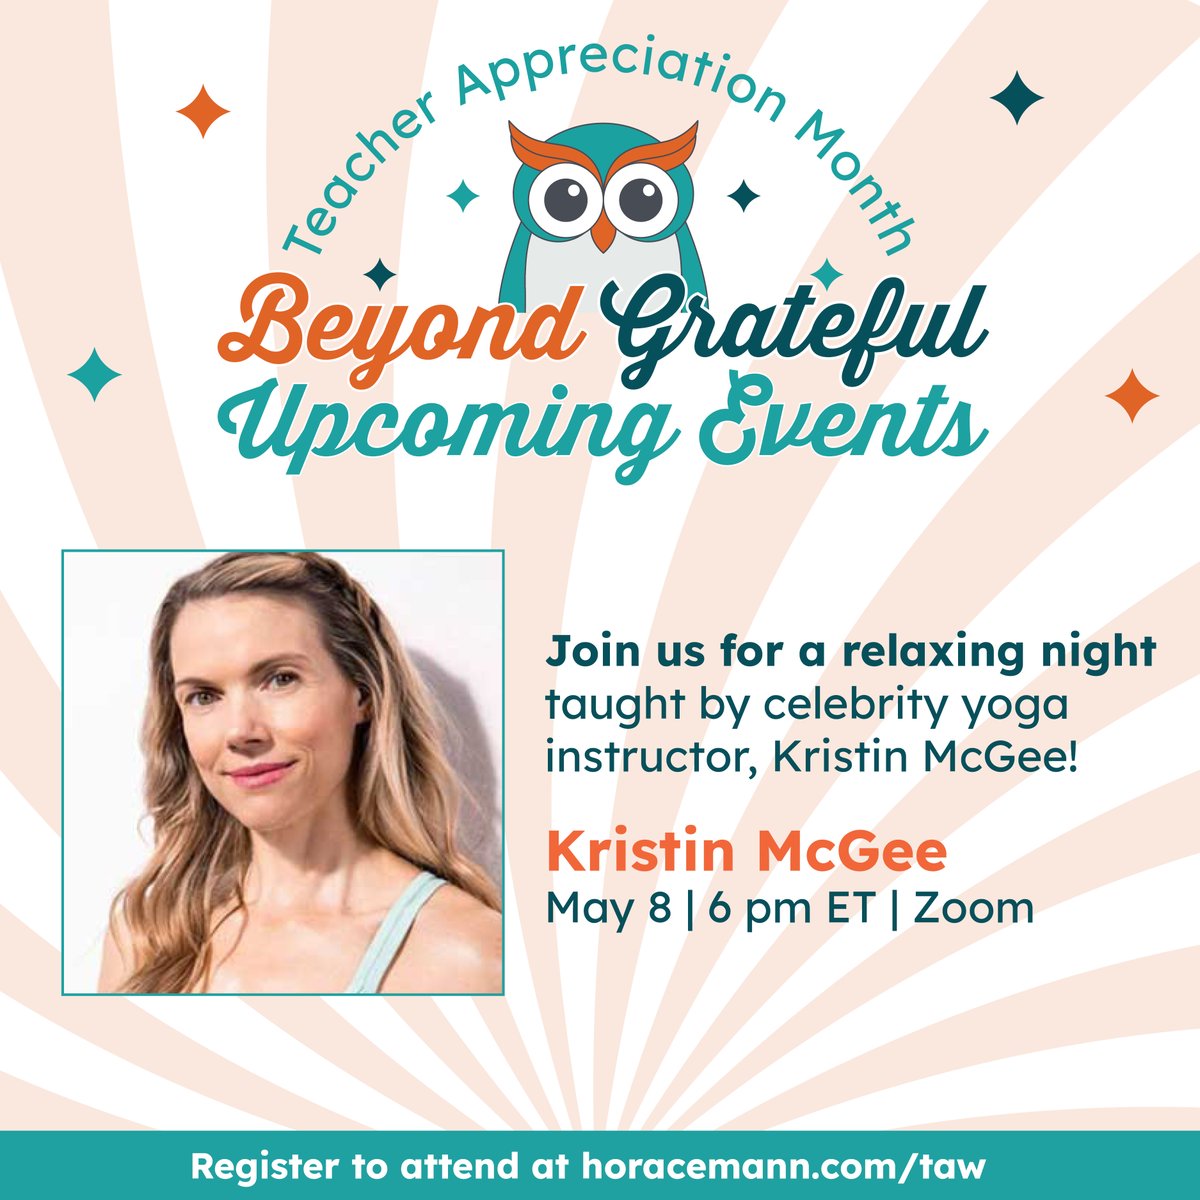 You’re invited to a FREE yoga class with celebrity yoga instructor Kristin McGee who will help melt away any end of the school year stress! Register to attend here: ow.ly/MN3H50Rnuvw We hope to see you there! #TeacherAppreciation #HMBeyondGrateful